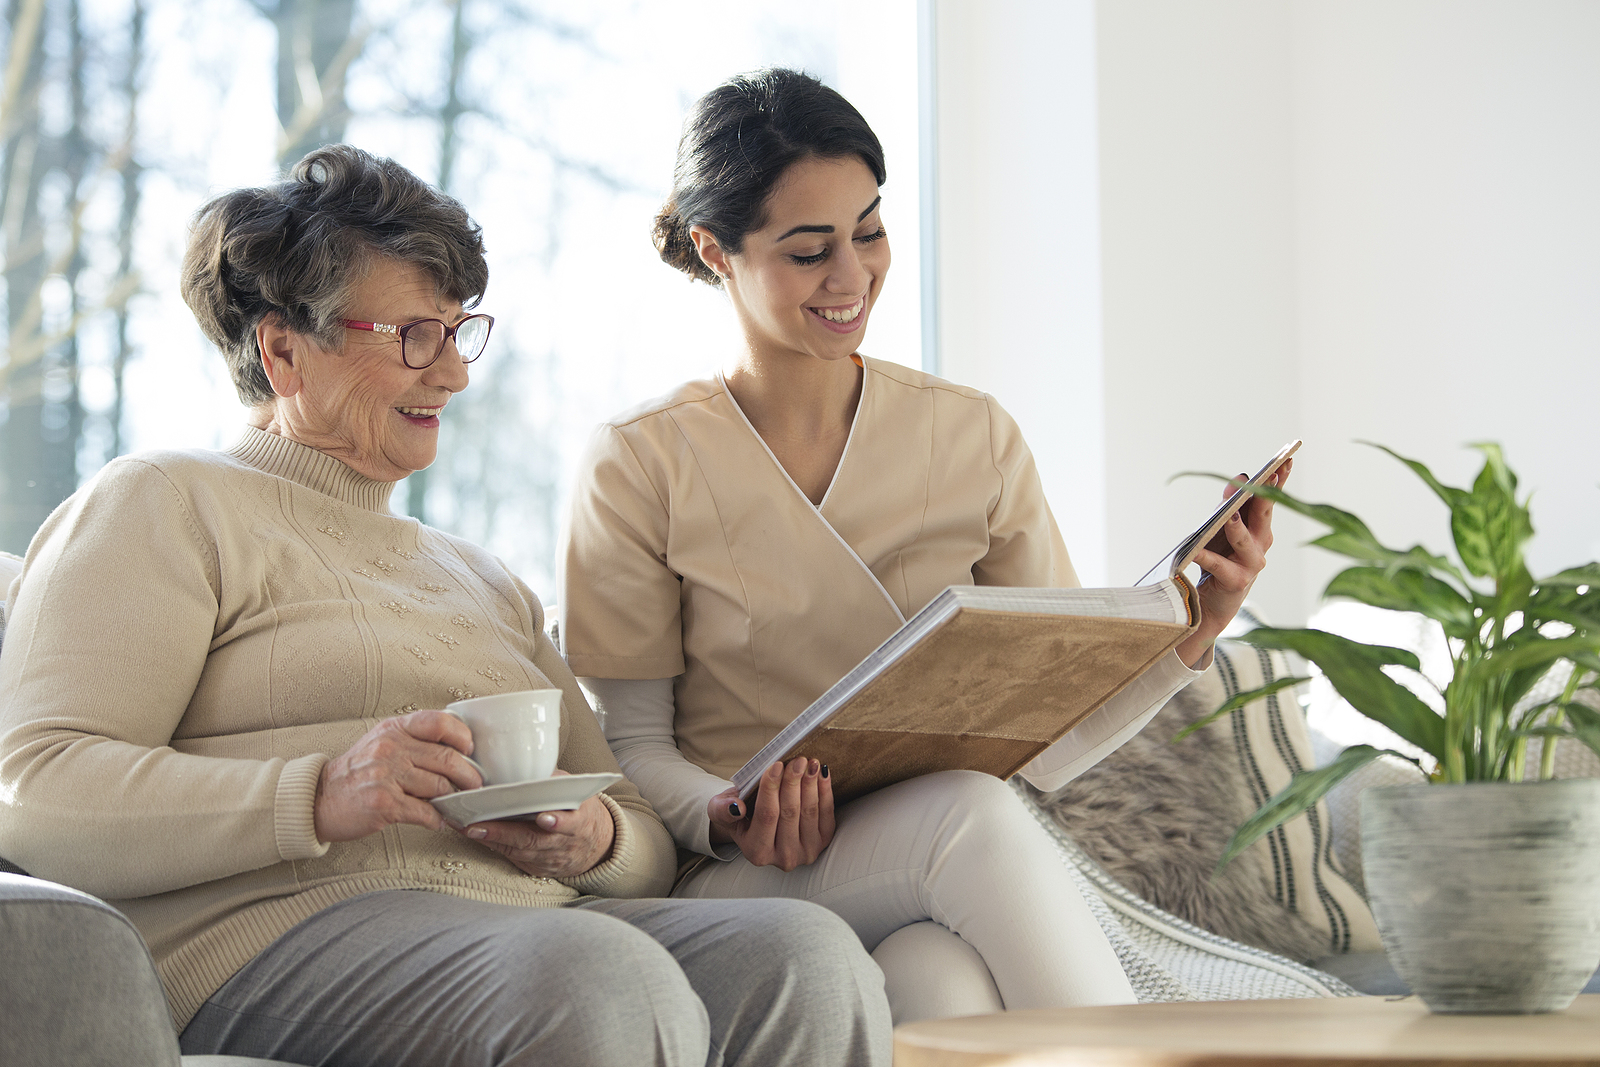 What Can Your Senior Expect with Companion Care at Home?